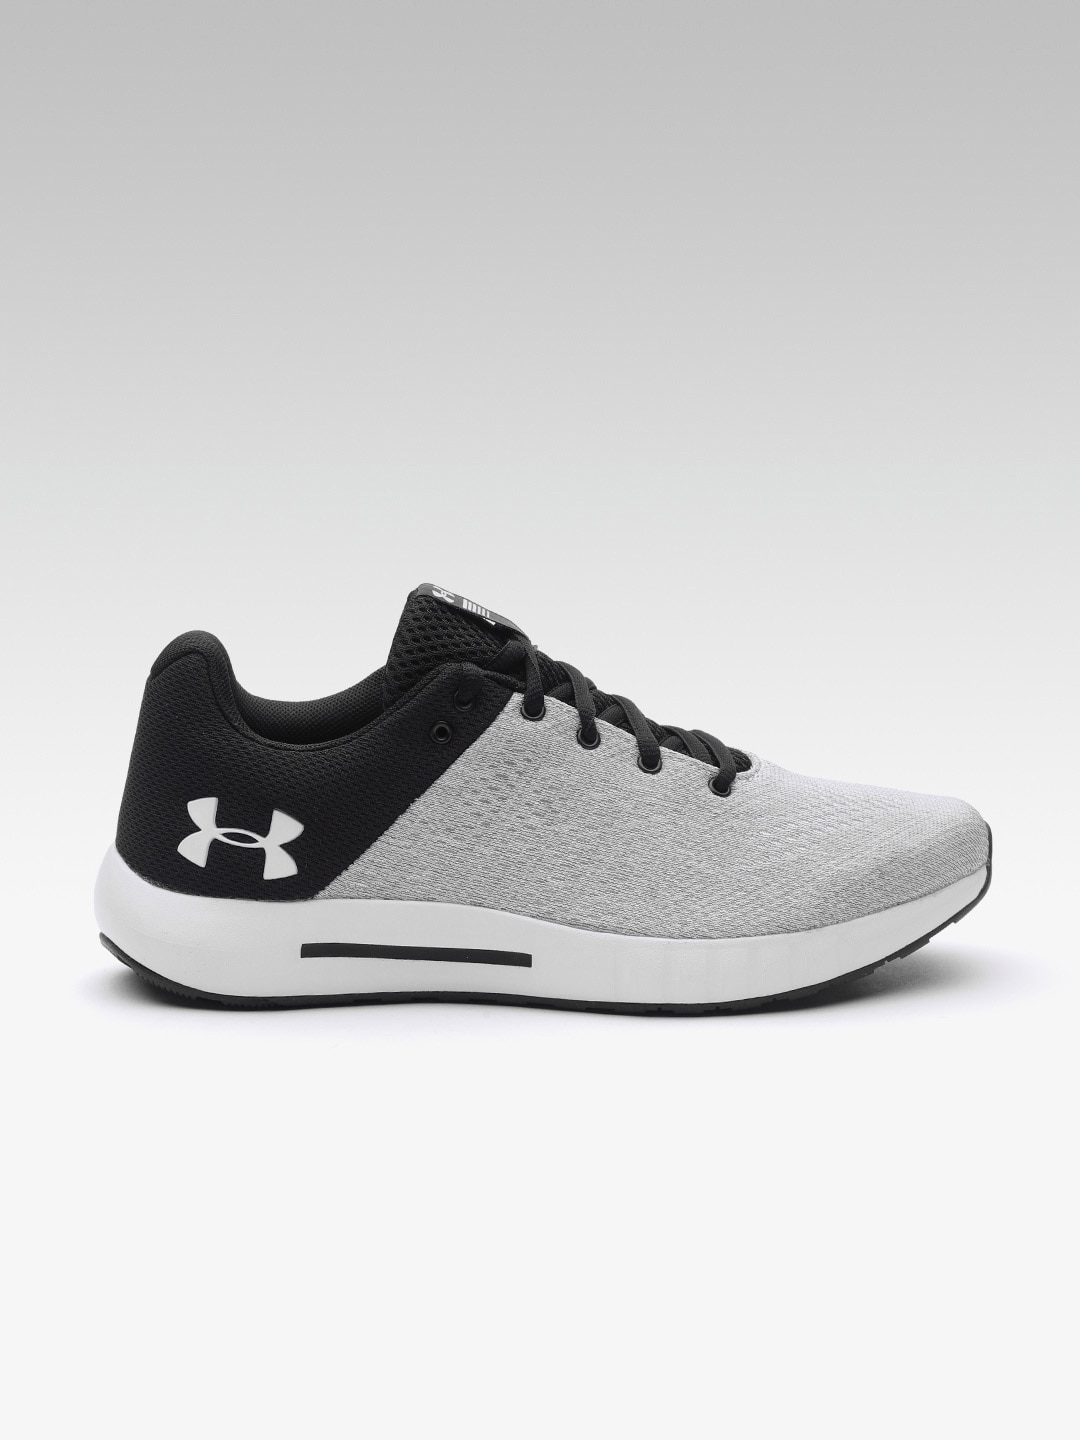 Women Under Armour Sports Shoes Price 